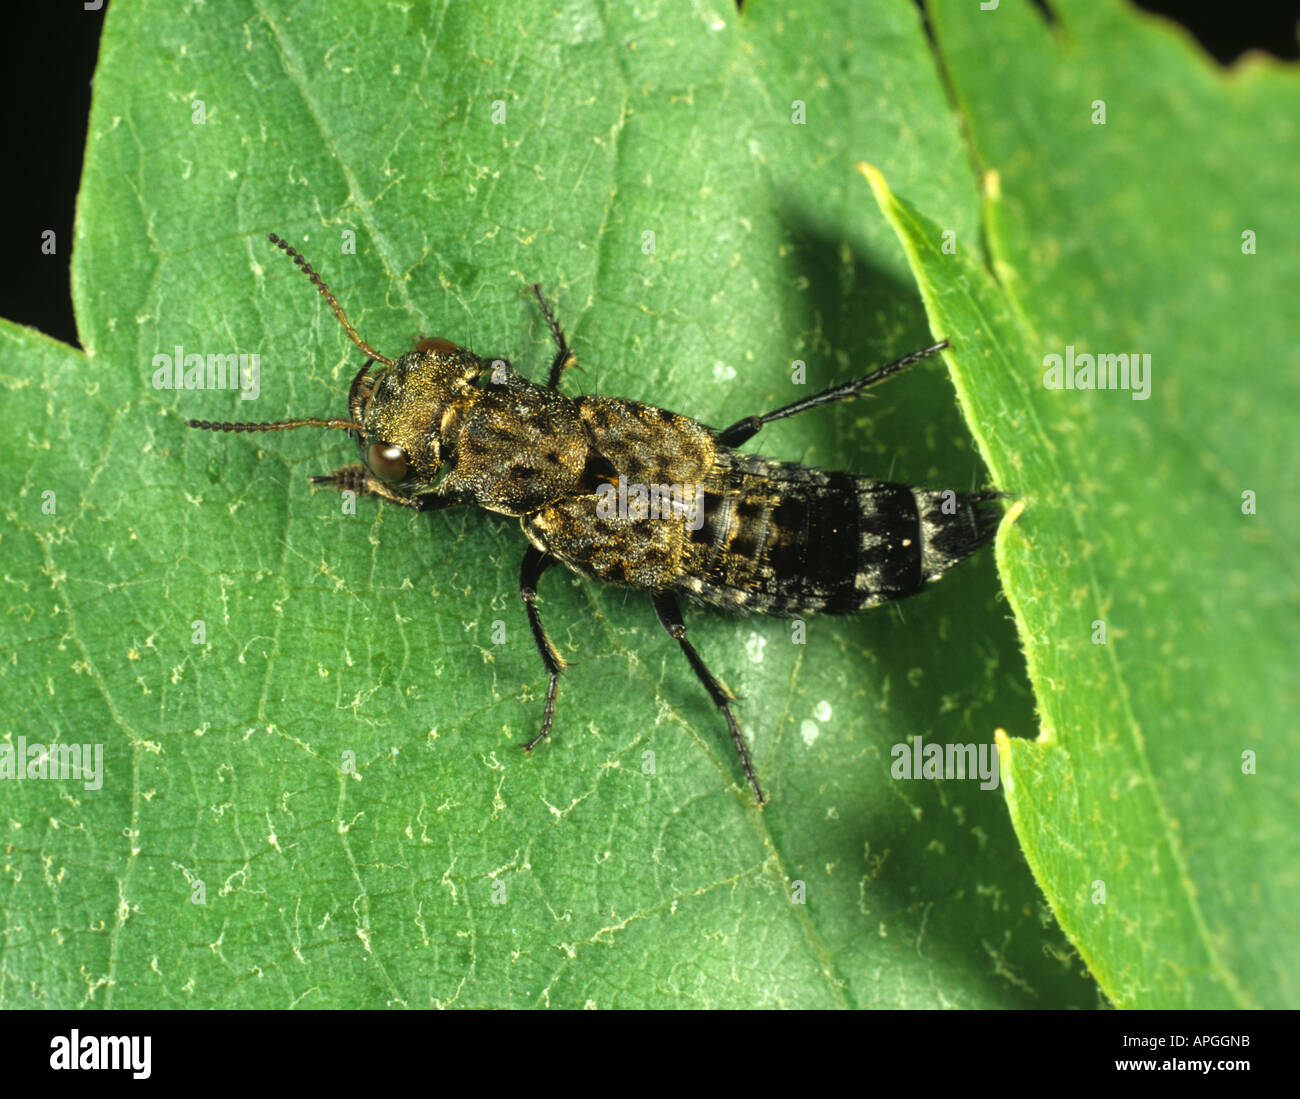 A rove or staphylinid beetle Ontholestes murinus a predator of fly larvae Stock Photo